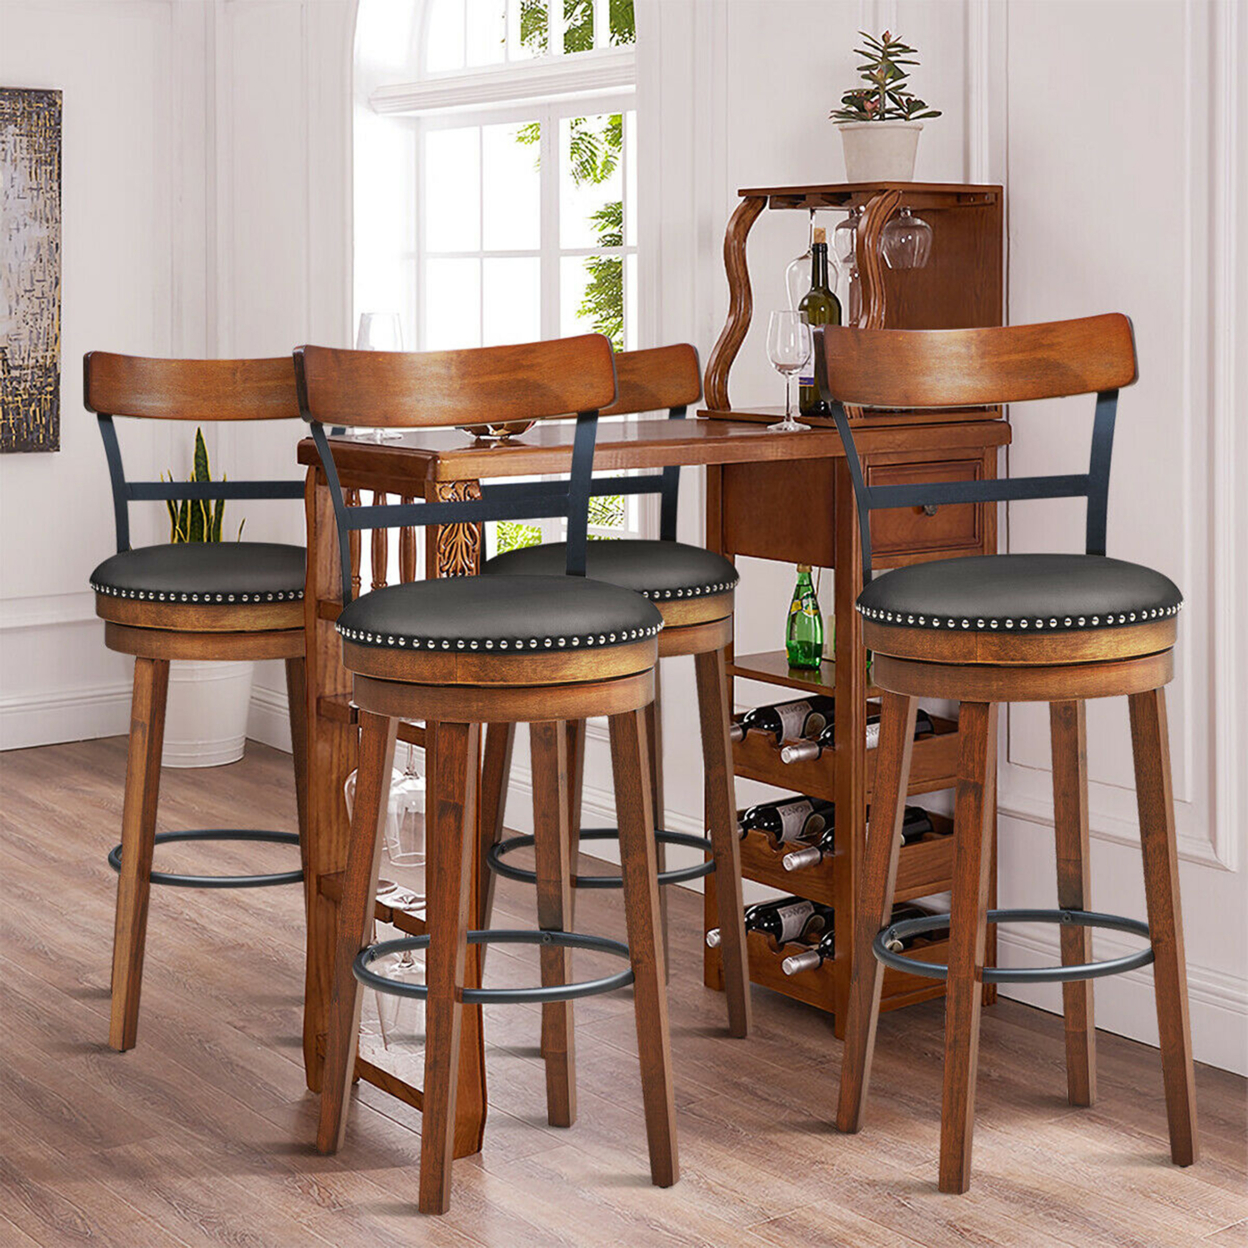 Set Of 4 BarStool 30.5'' Swivel Pub Height Dining Chair With Rubber Wood Legs